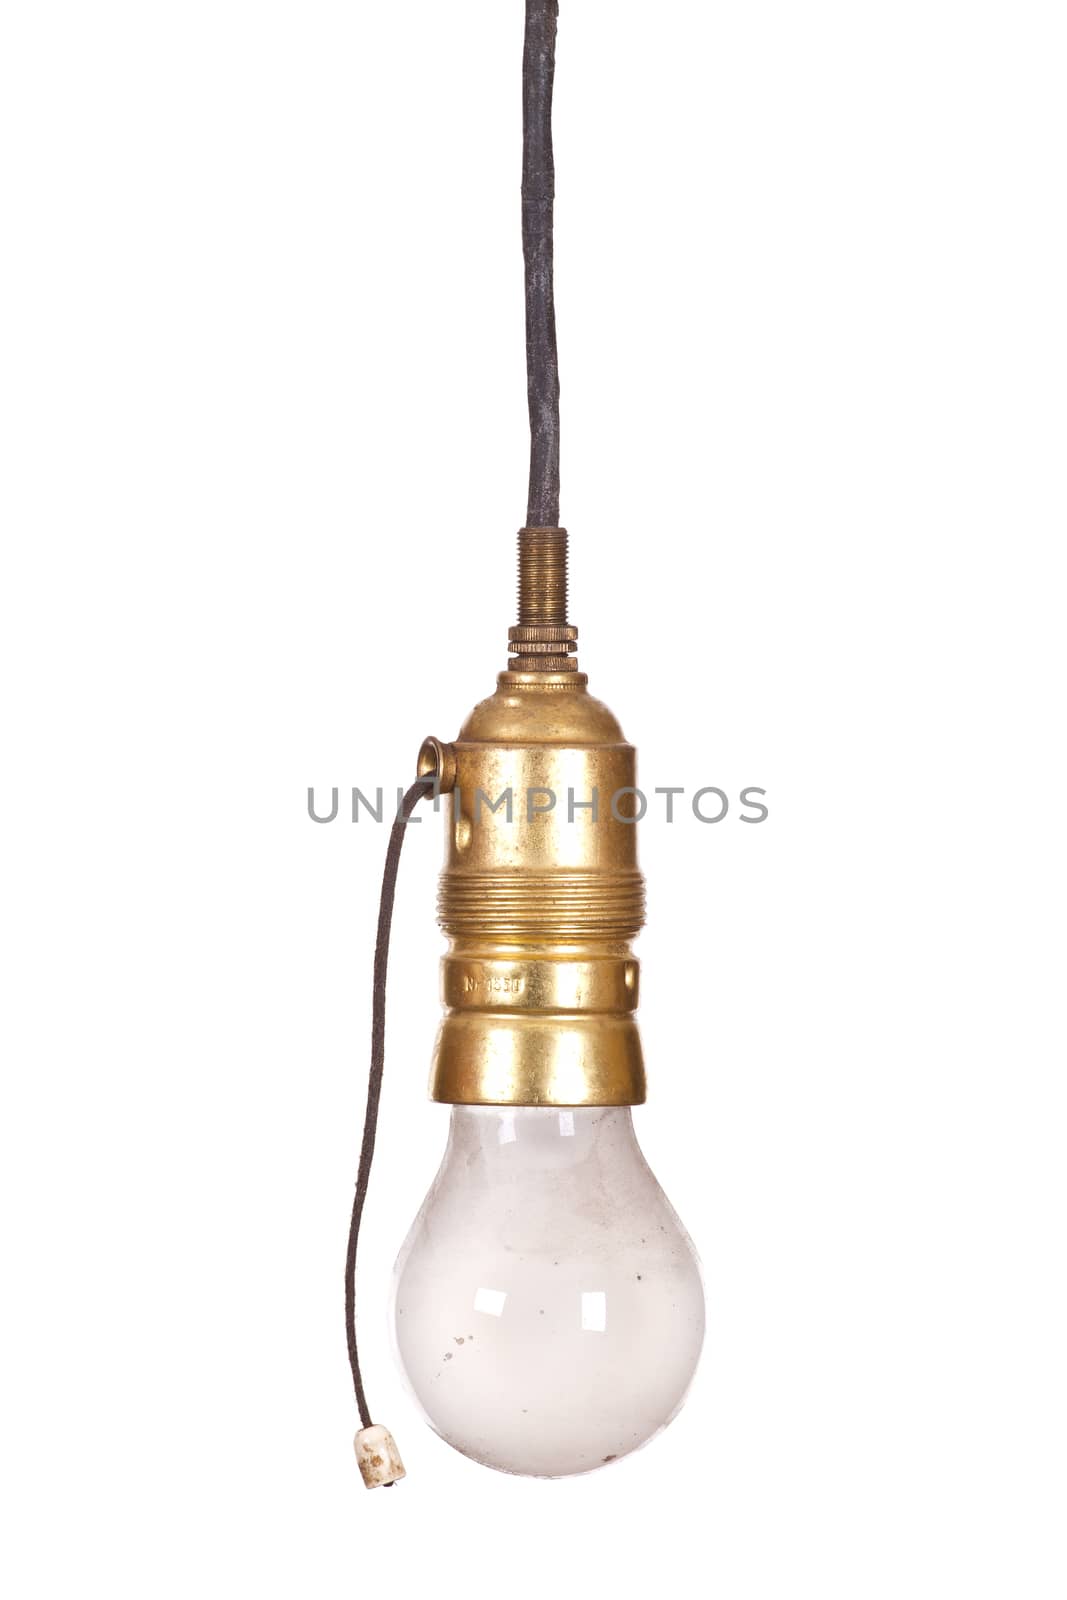 very old bulb fitting with light